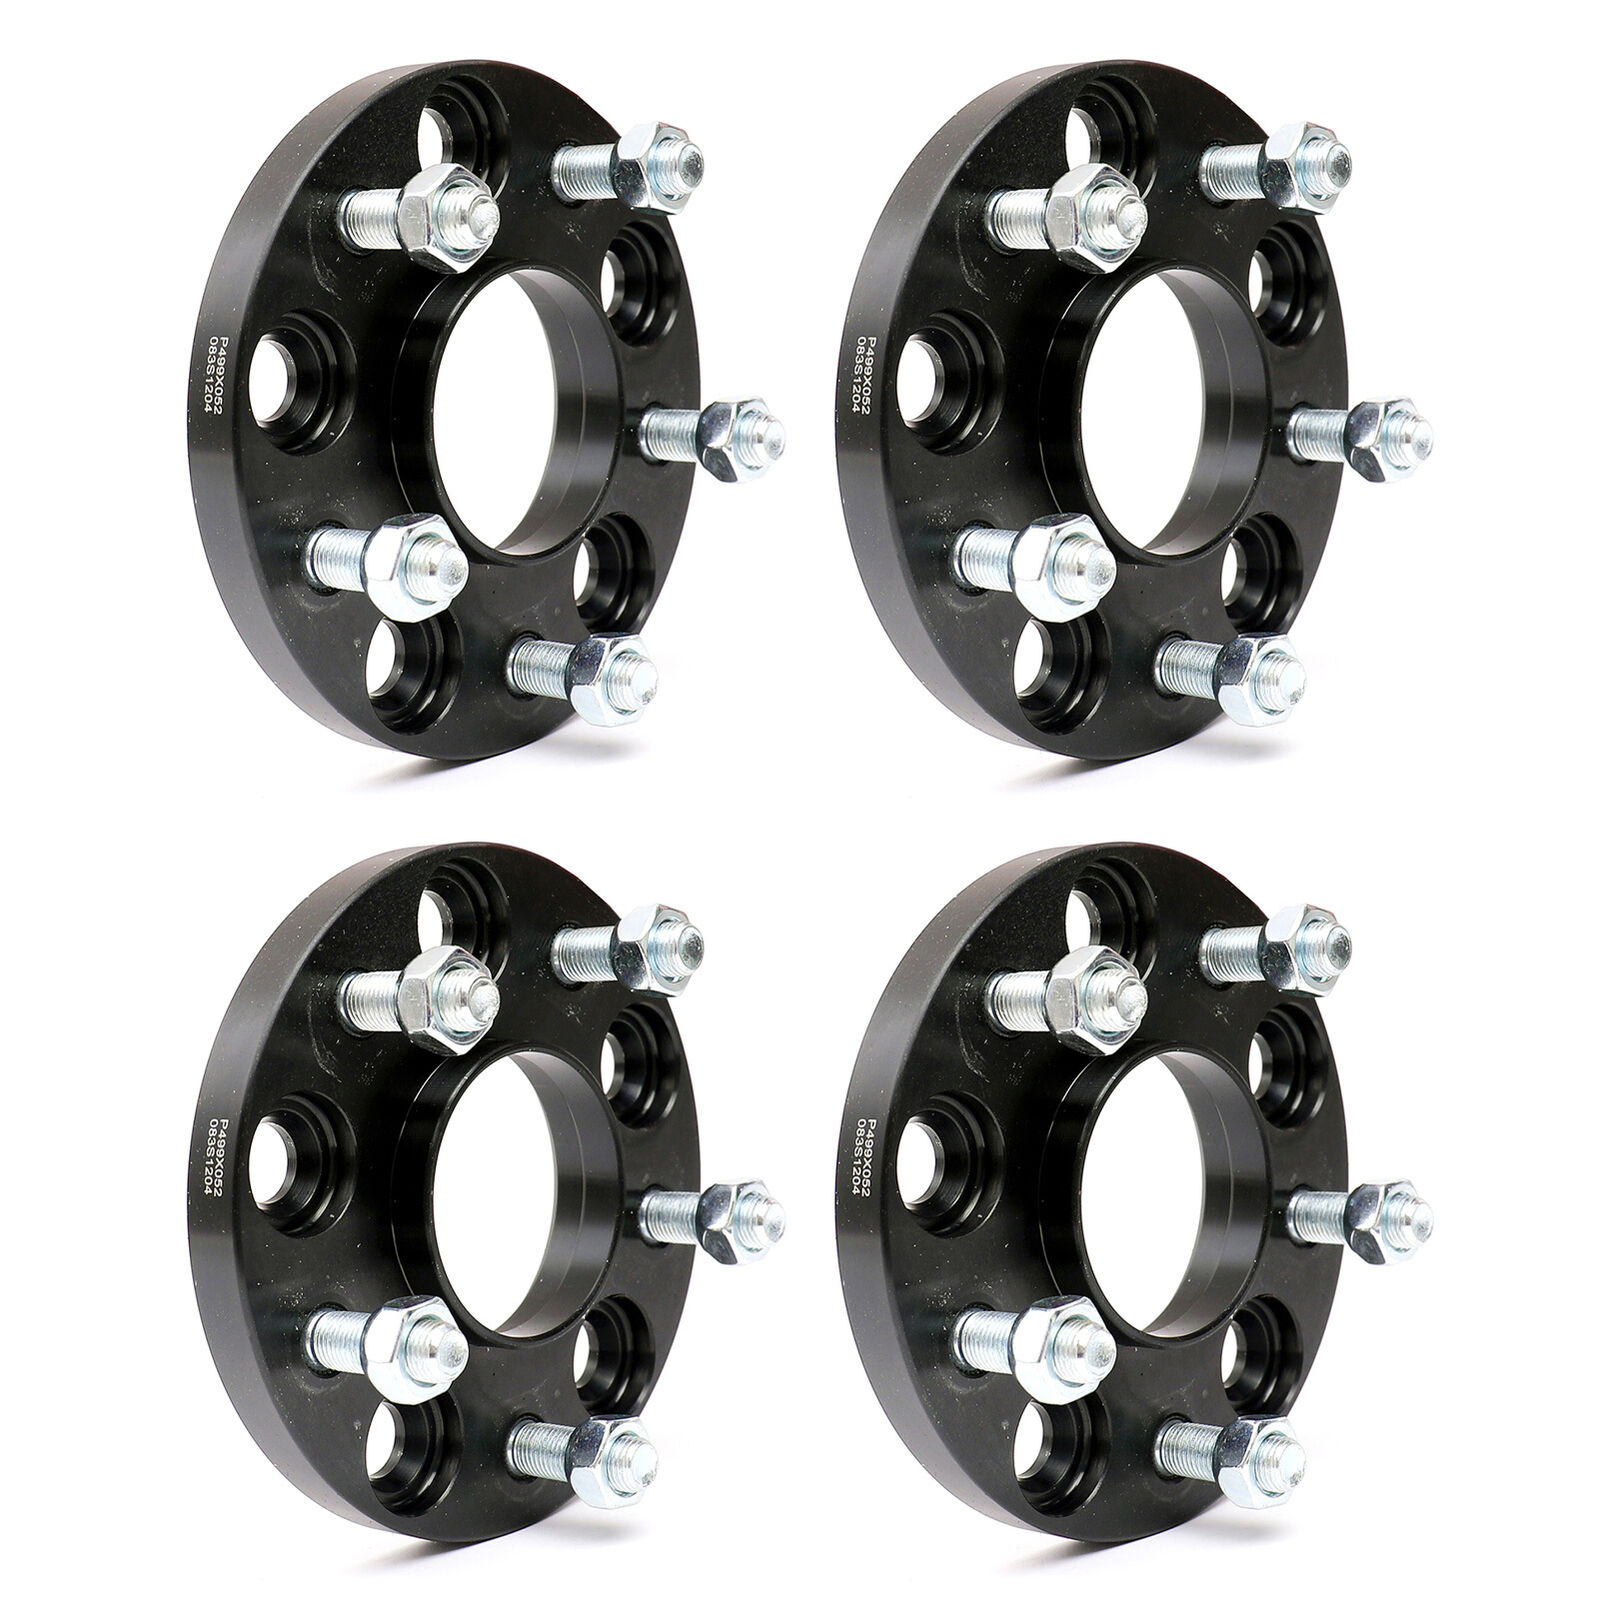 15mm 4*Wheel Spacers Hubcentric 5x114.3 12X1.25 66.1CB Fit Nissan 300ZX 350Z G37